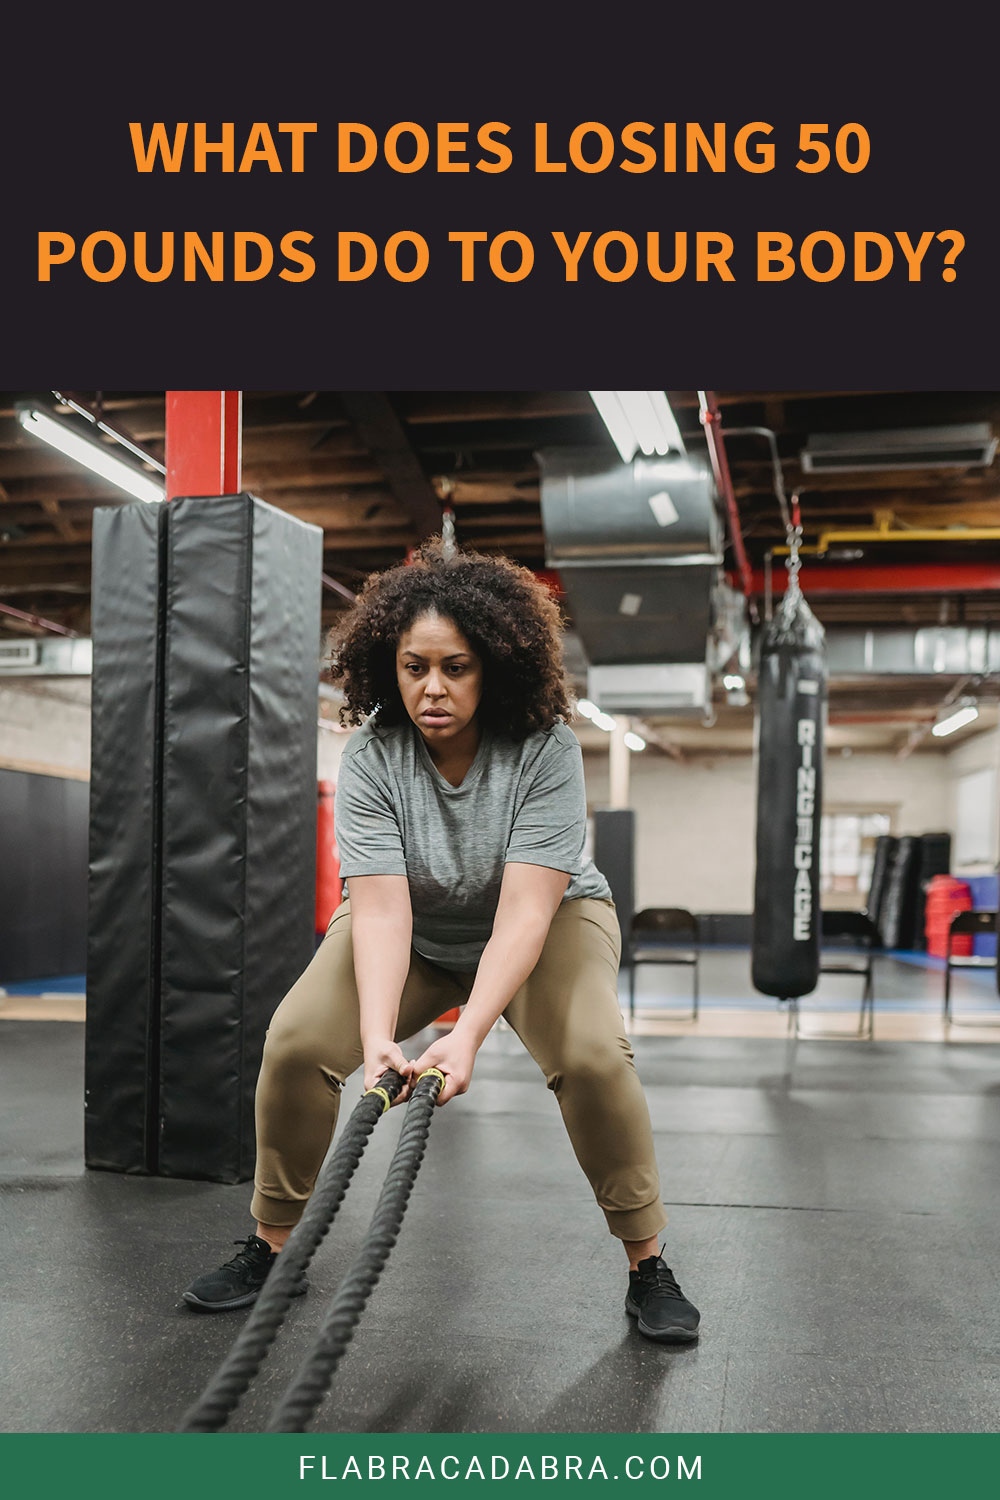 What Does Losing 50 Pounds Do To Your Body?